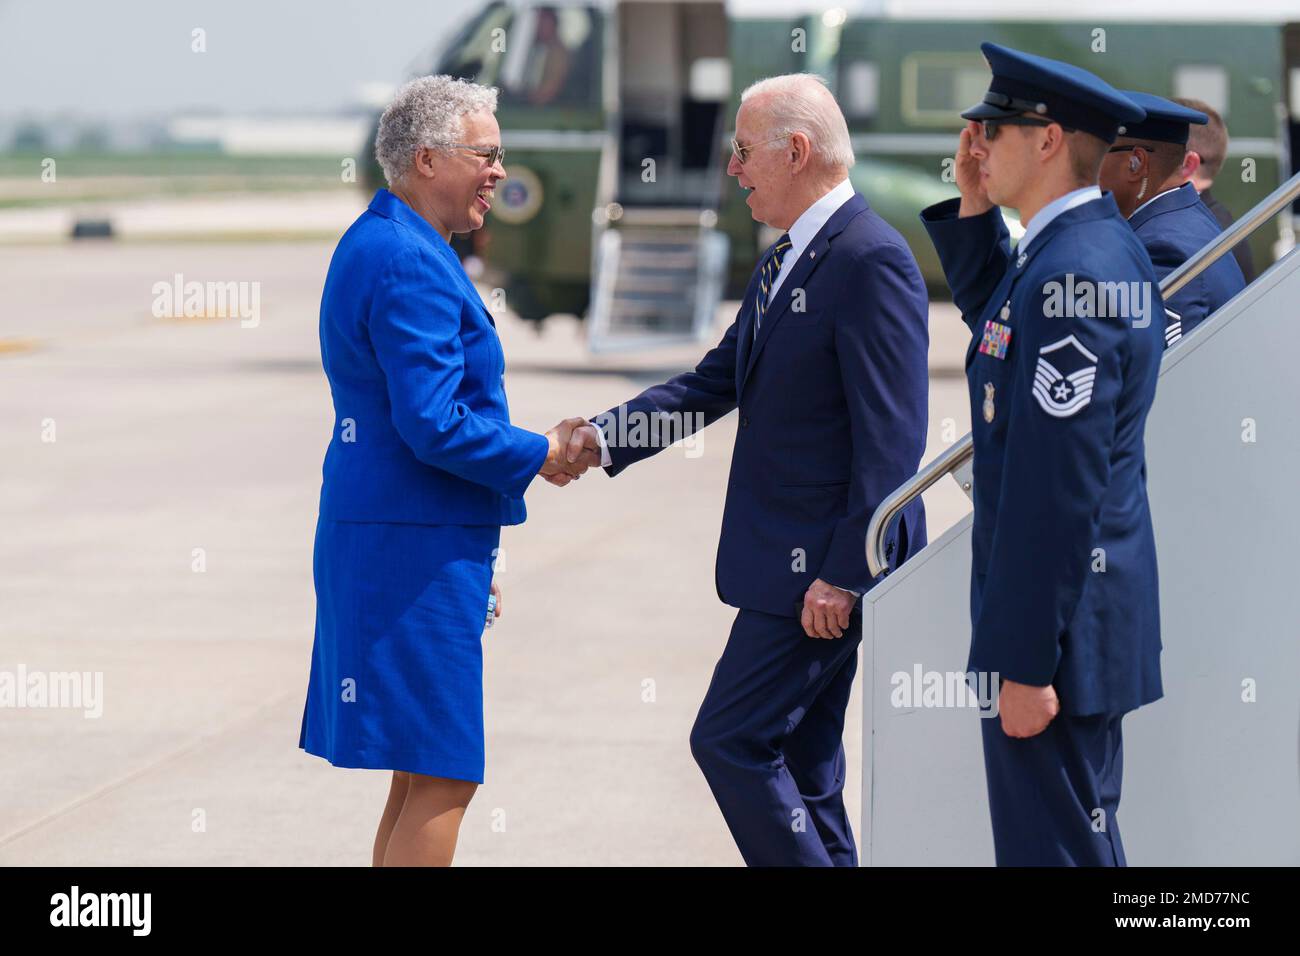 Reportage: President Joe Biden disembarks Air Force One at Chicago’s O’Hare International Airport, Wednesday, May 11, 2022, and greets Toni Preckwinkle, Chairperson of the Cook County Board of Commissioners. Stock Photo